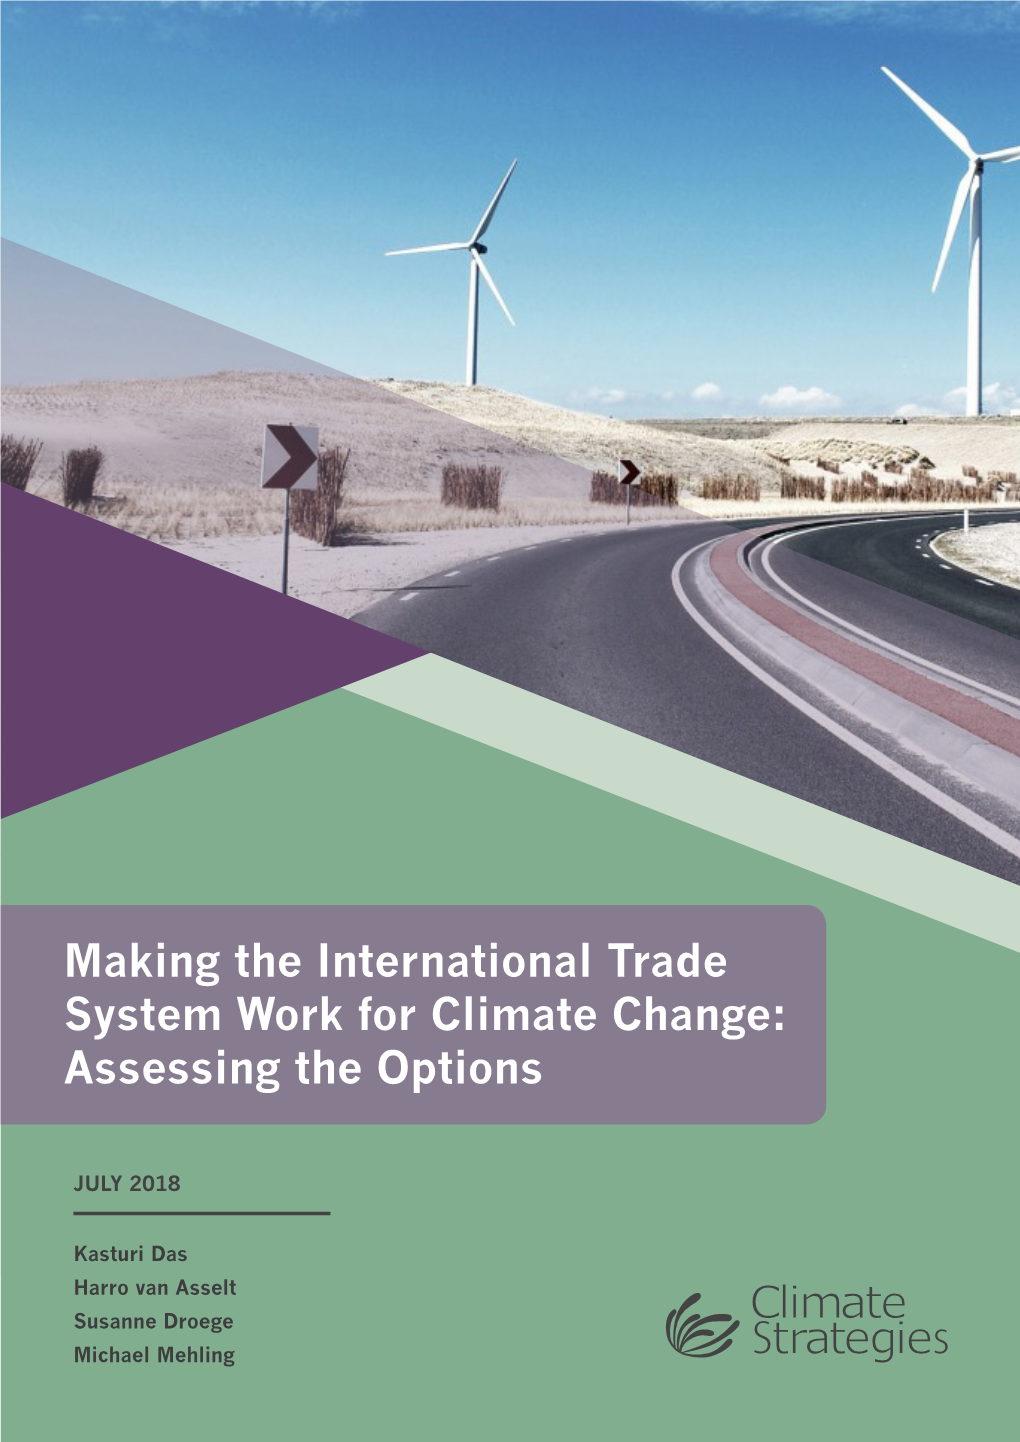 Making the International Trade System Work for Climate Change: Assessing the Options